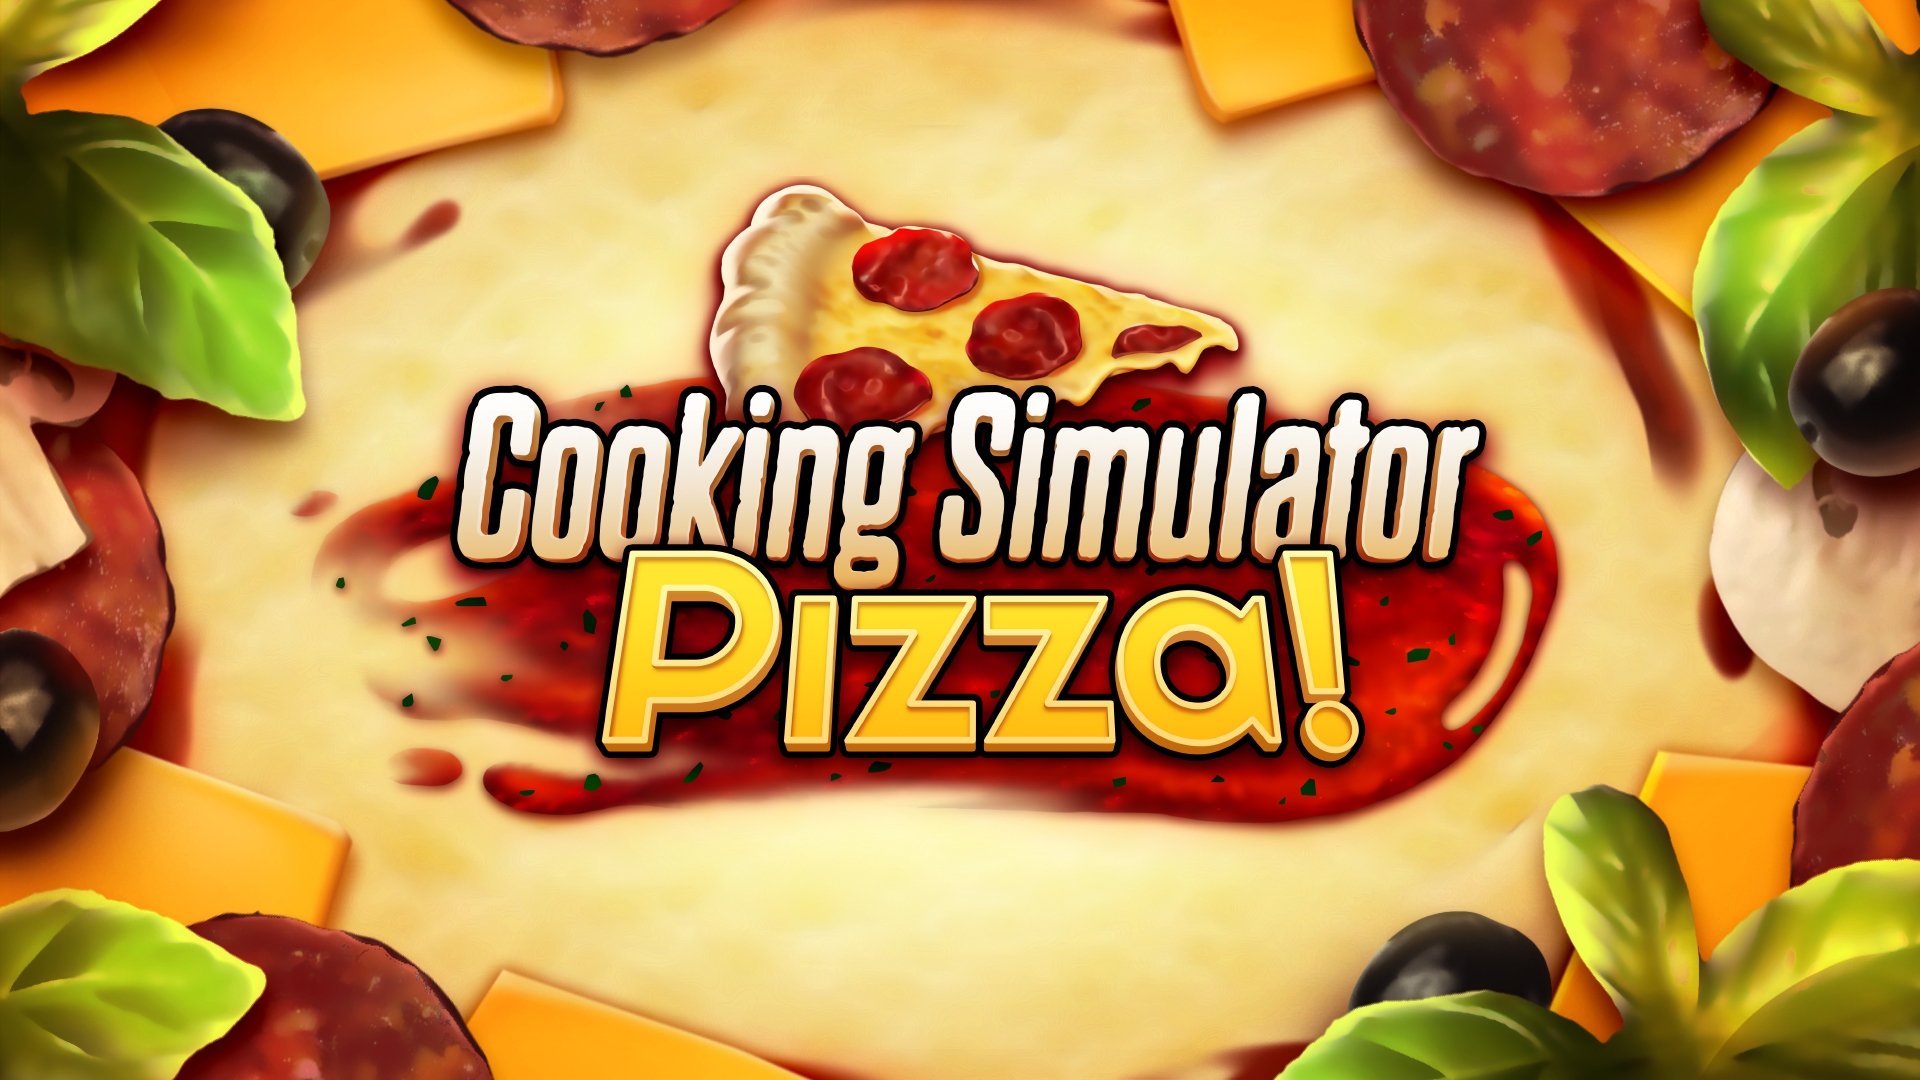 🔴 It's a Pizza Party! New DLC Gameplay - Cooking Simulator